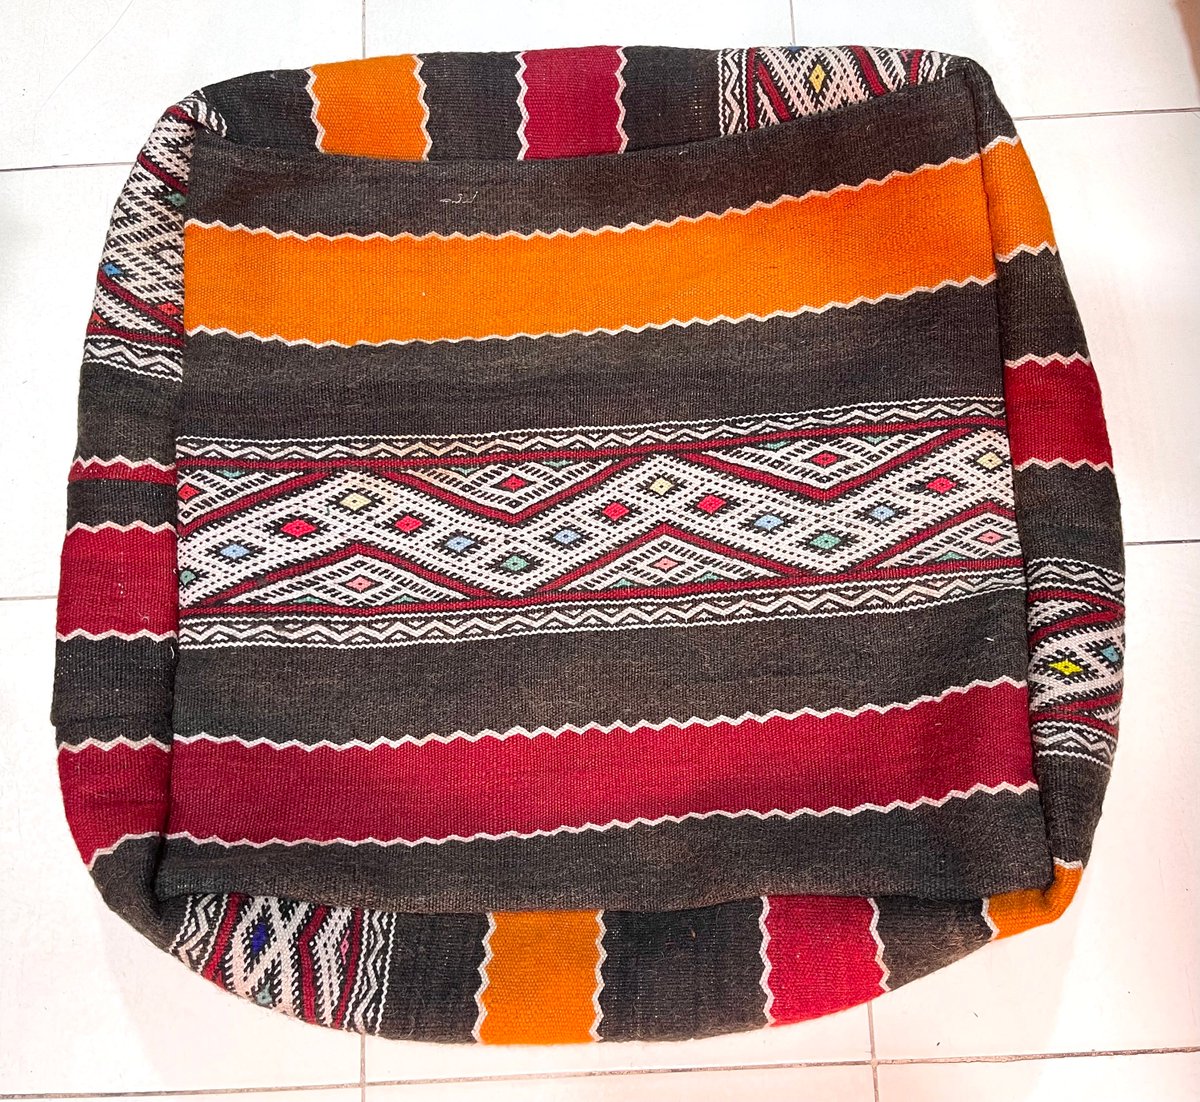 Excited to share the latest addition to my #etsy shop: Moroccan Pouf, Moroccan Berber Kilim Pouf etsy.me/3zt0VQC #meditationcushion #ottoman #poufottoman #poufmoroccan #floorpillow #morrocanpouf #moroccankilim #pouffloor #berberpouf